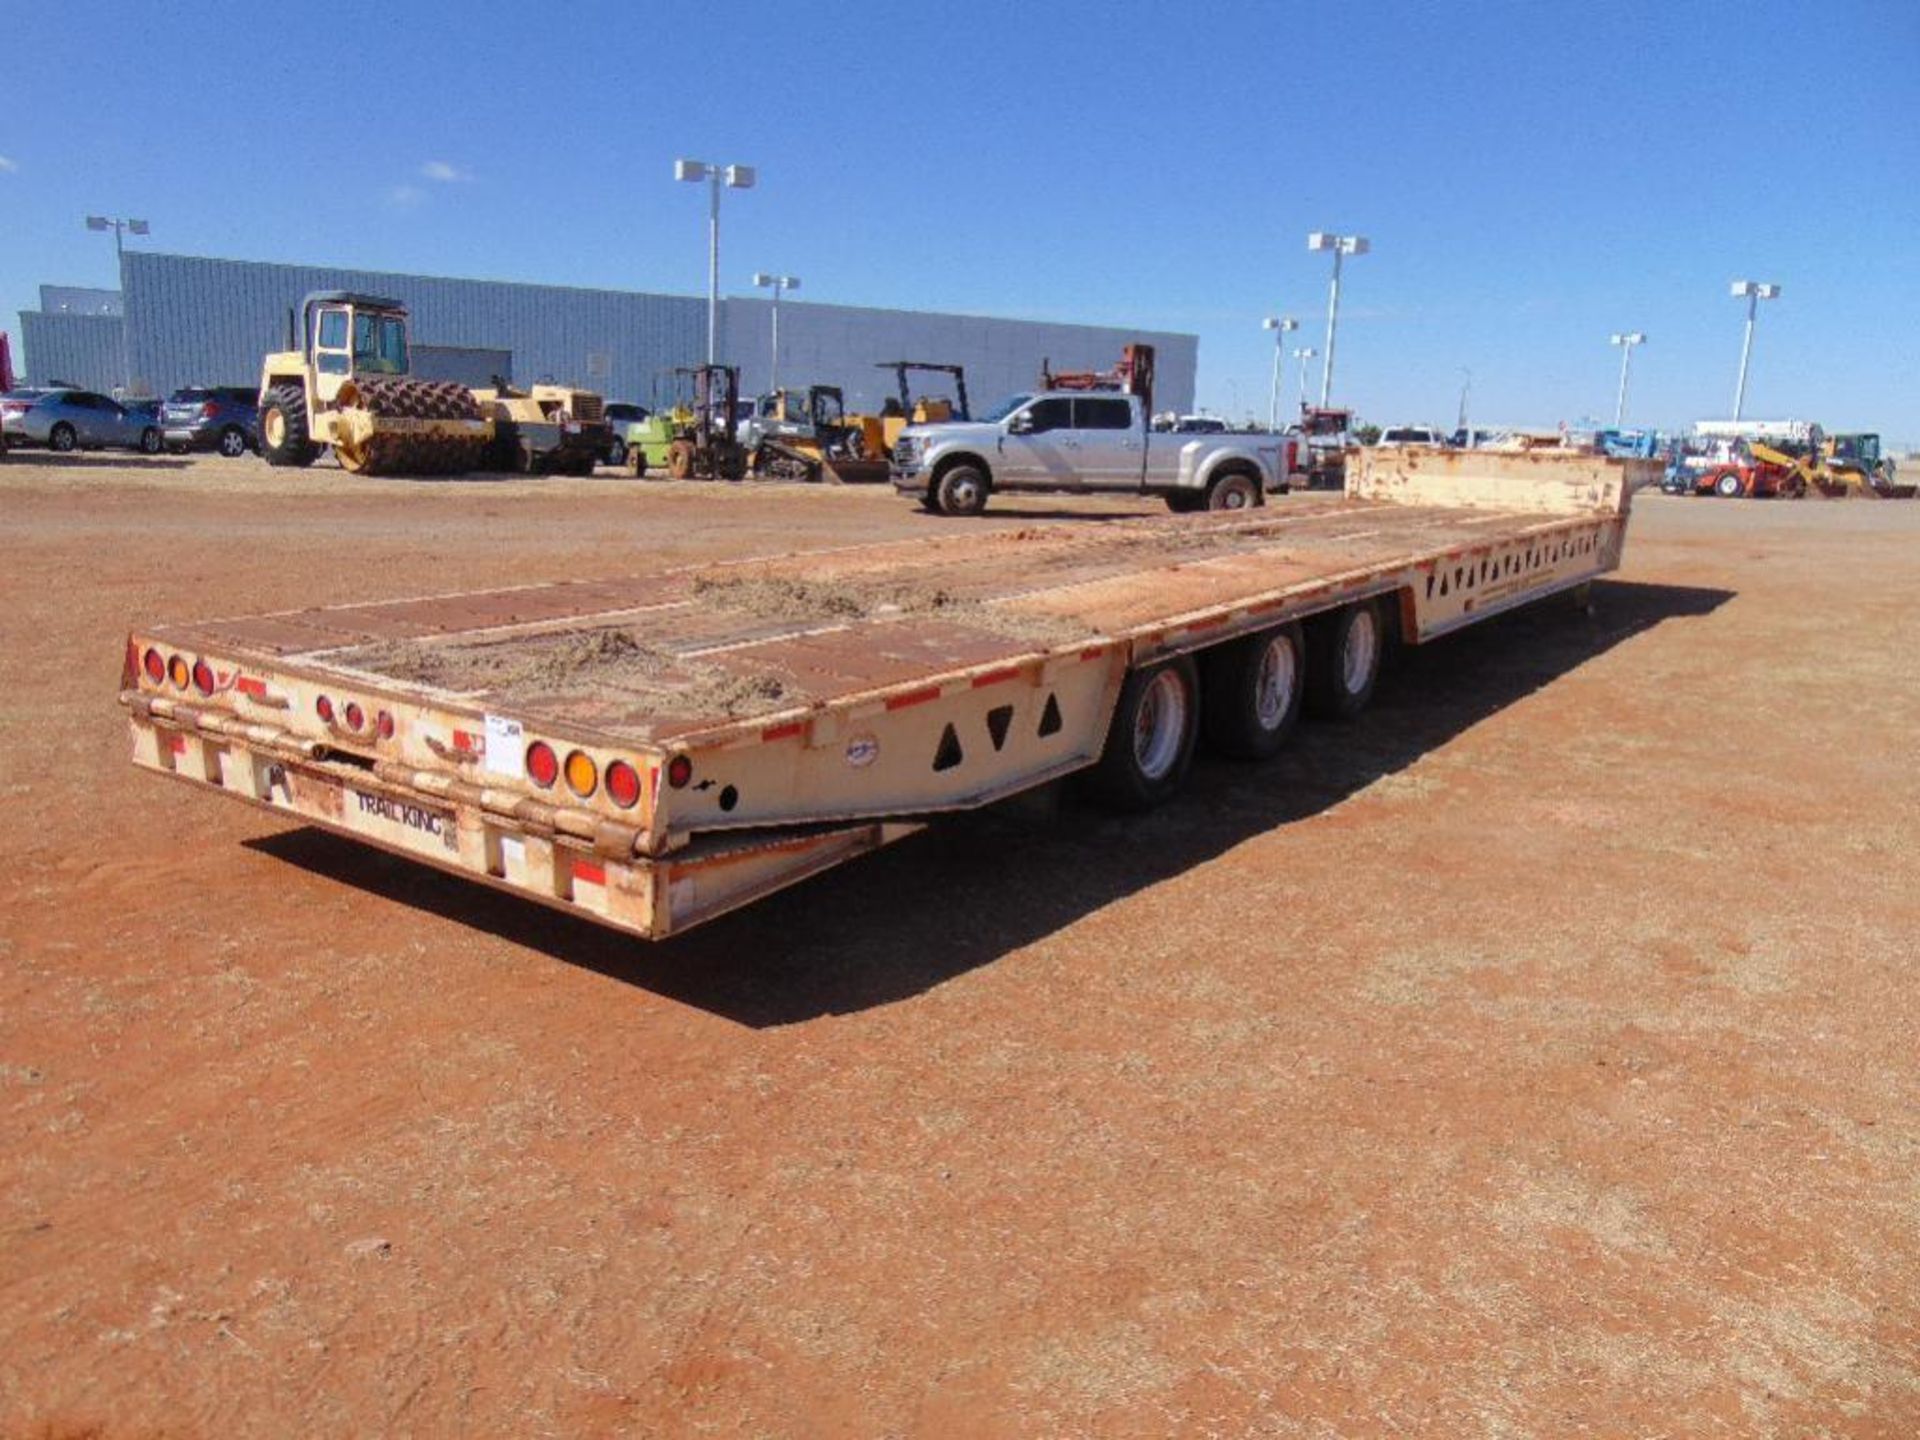 2006 Trailking Triaxle Hyd Tail Lowboy s/n 1tka048308m124115,hyd winch,33' load deck,9' tail,9' neck - Image 4 of 4